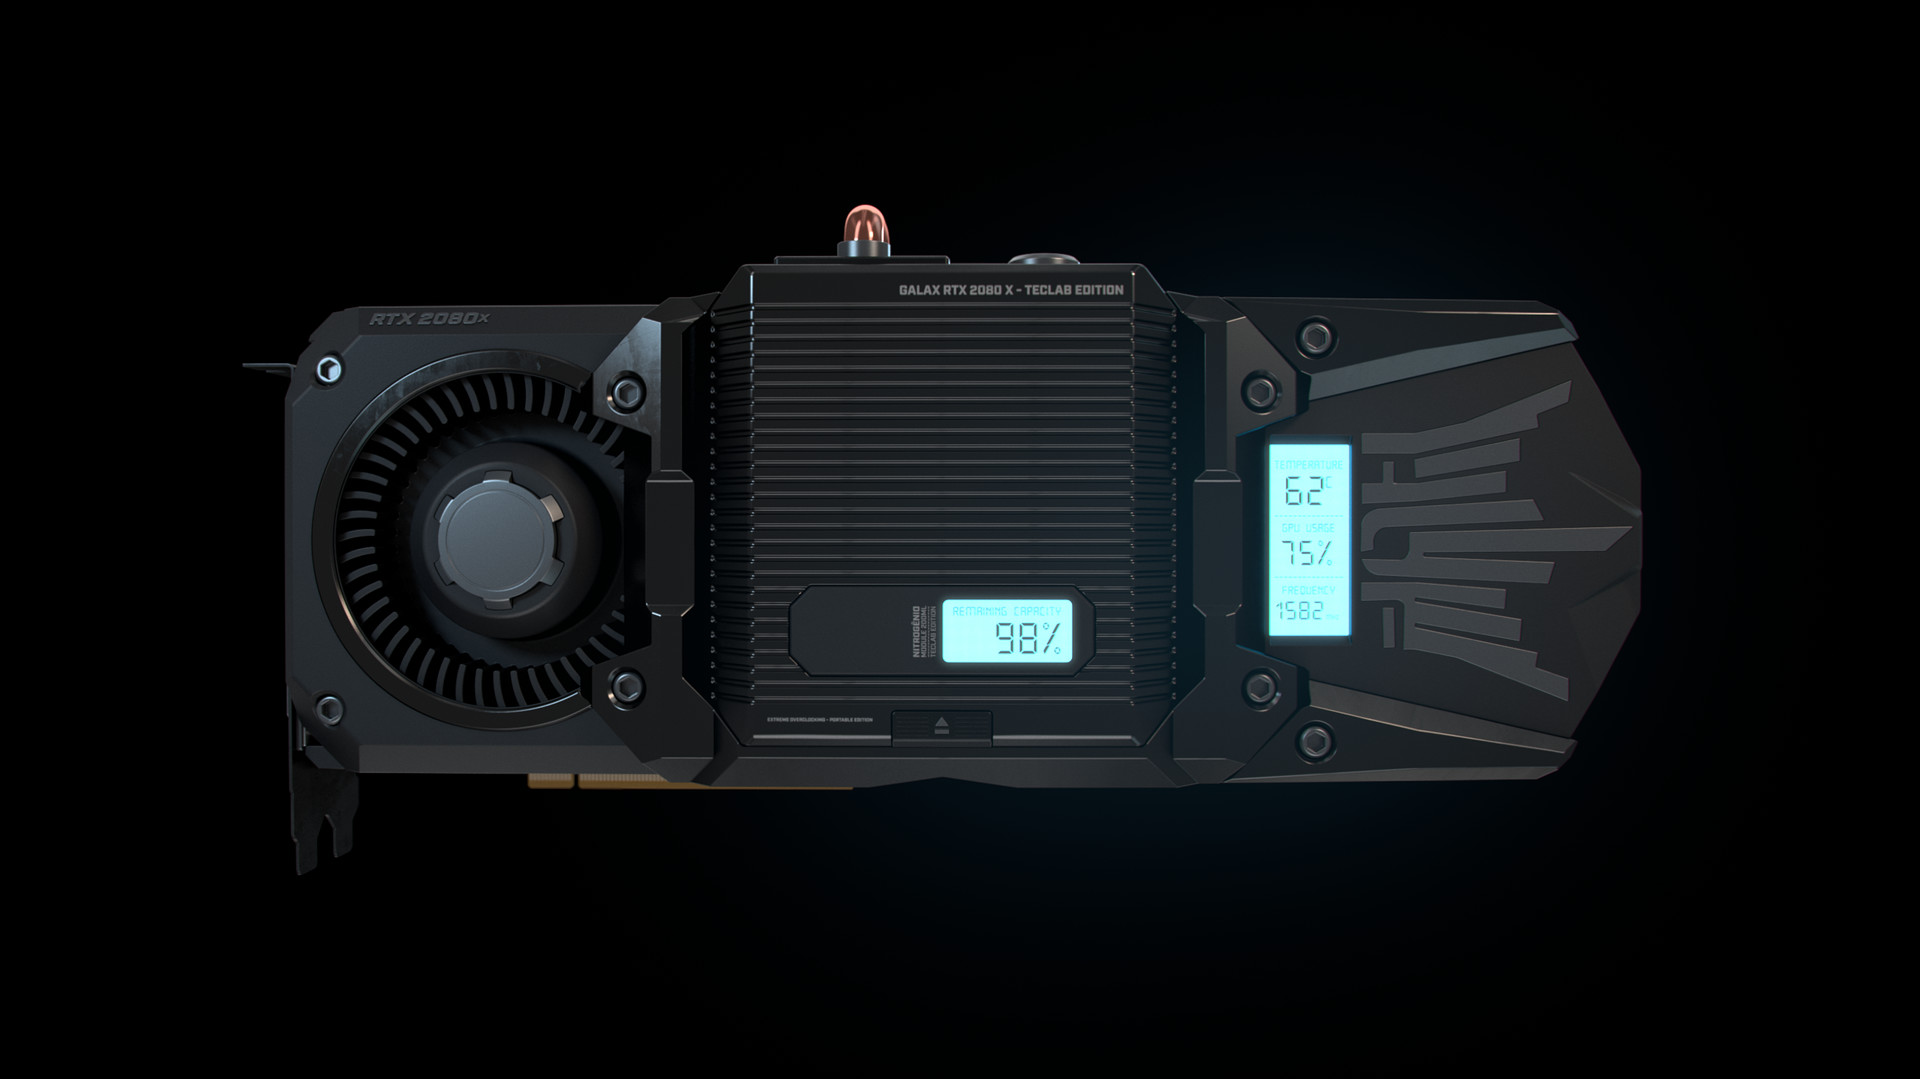 Wanderson Magalhães - Concept GPU - Graphics Card - [Galax]